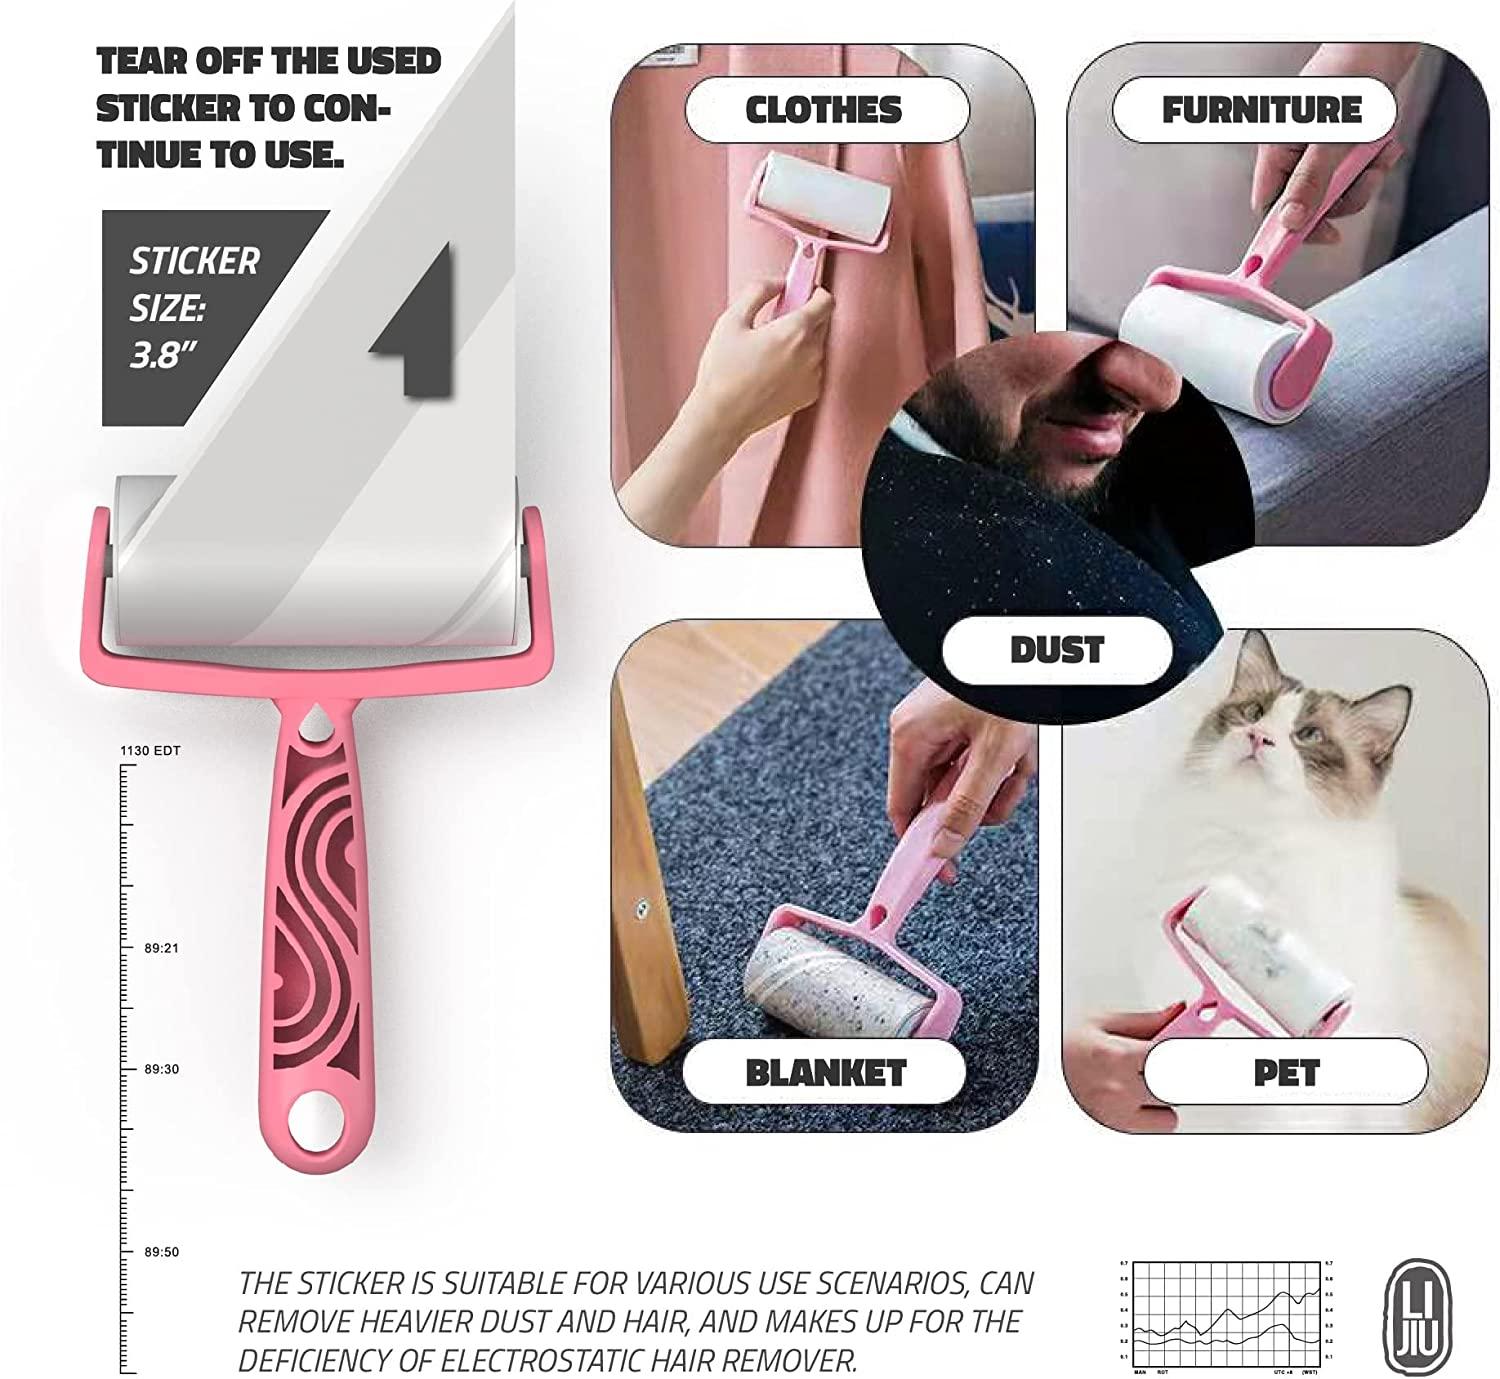 LIJIU Pet Hair Remover Roller 3Pack for Cleaning Cat Fuzzy & Dog Hair on  Cloth, Furniture, Couch, Carpet, Bed and etc. (Contain Reusable Roller, Sticky  lint Roller & pet Hair Scraper)